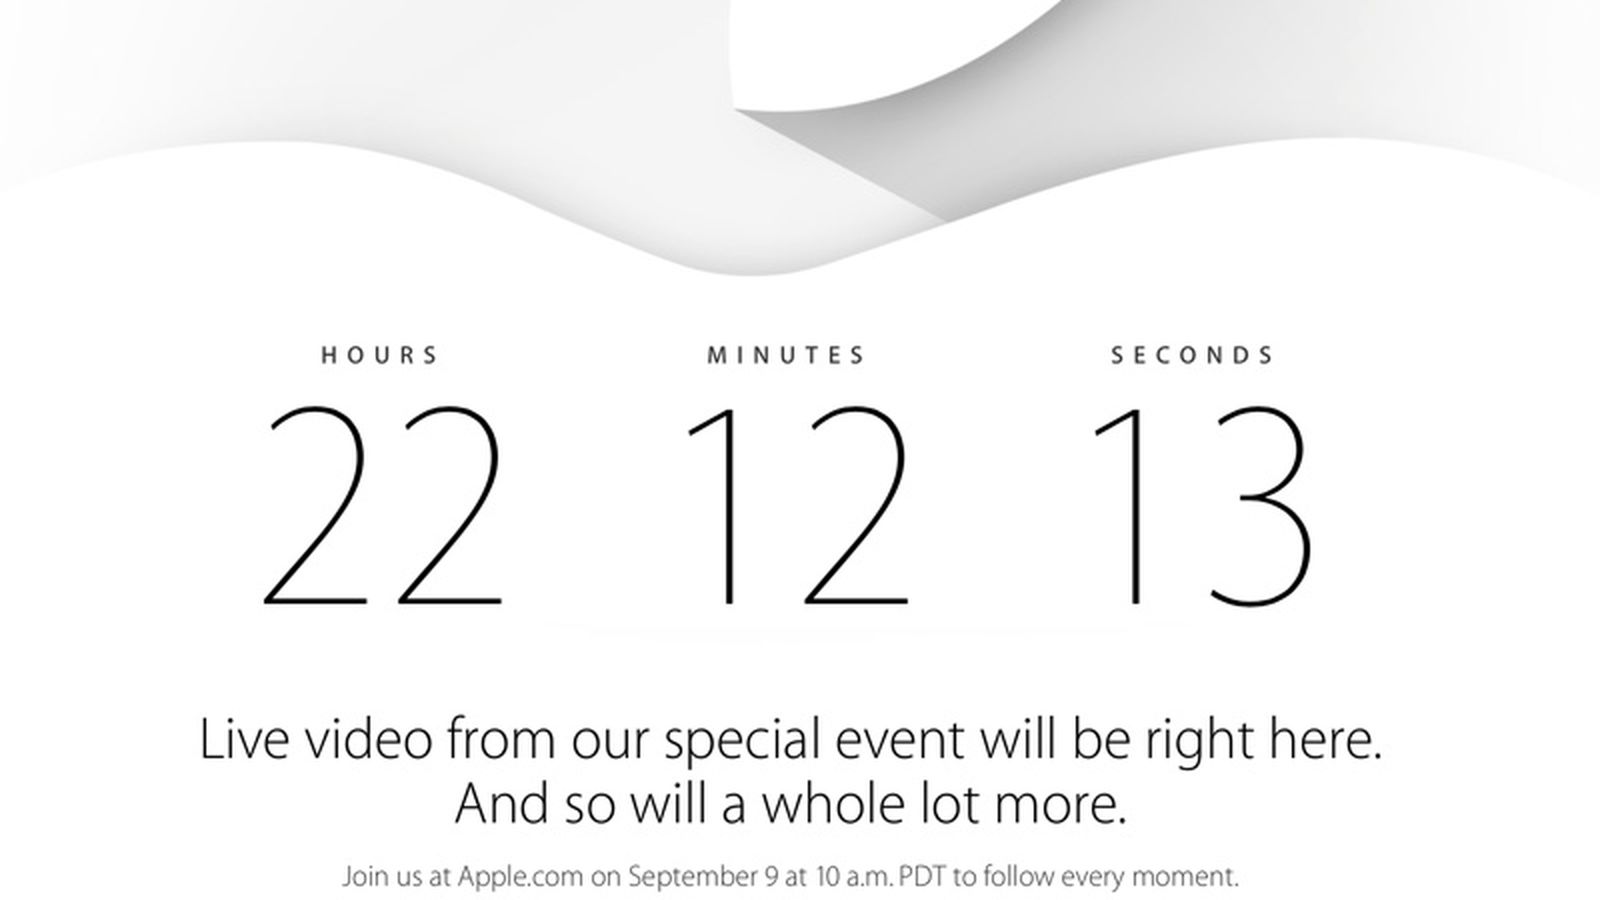 An image of a countdown for an event with 22 days left. The image is mostly white and designed in a minimalist way.